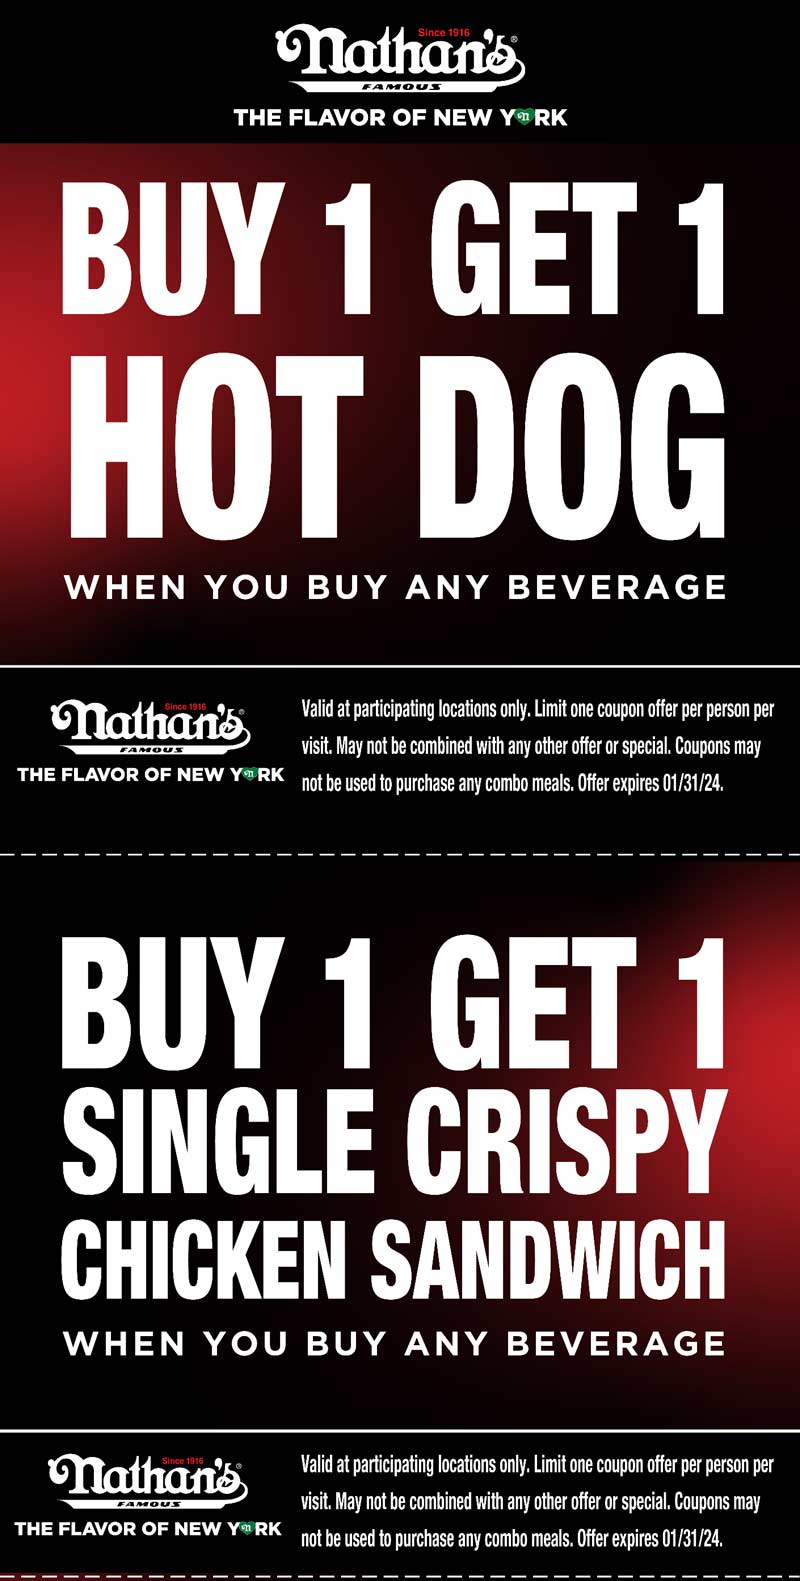 Nathans Famous restaurants Coupon  Second hot dog or chicken sandwich free with your drink at Nathans Famous #nathansfamous 